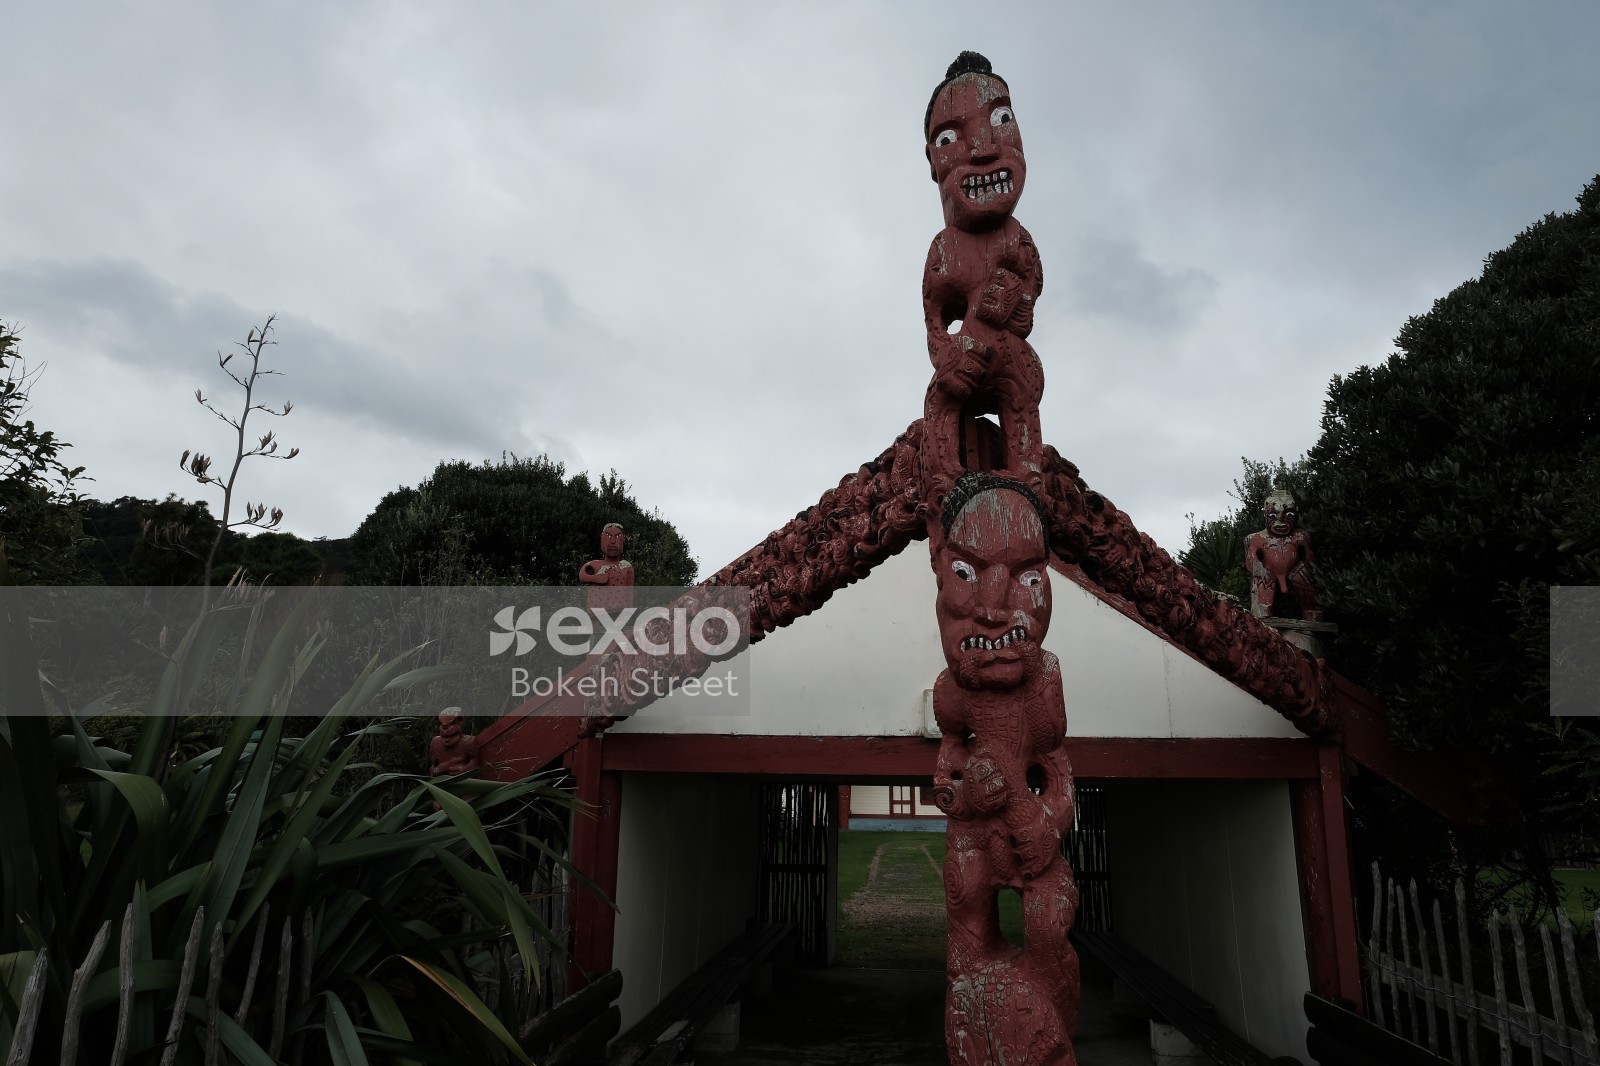 Māori carved totem pole and entrance to Marae